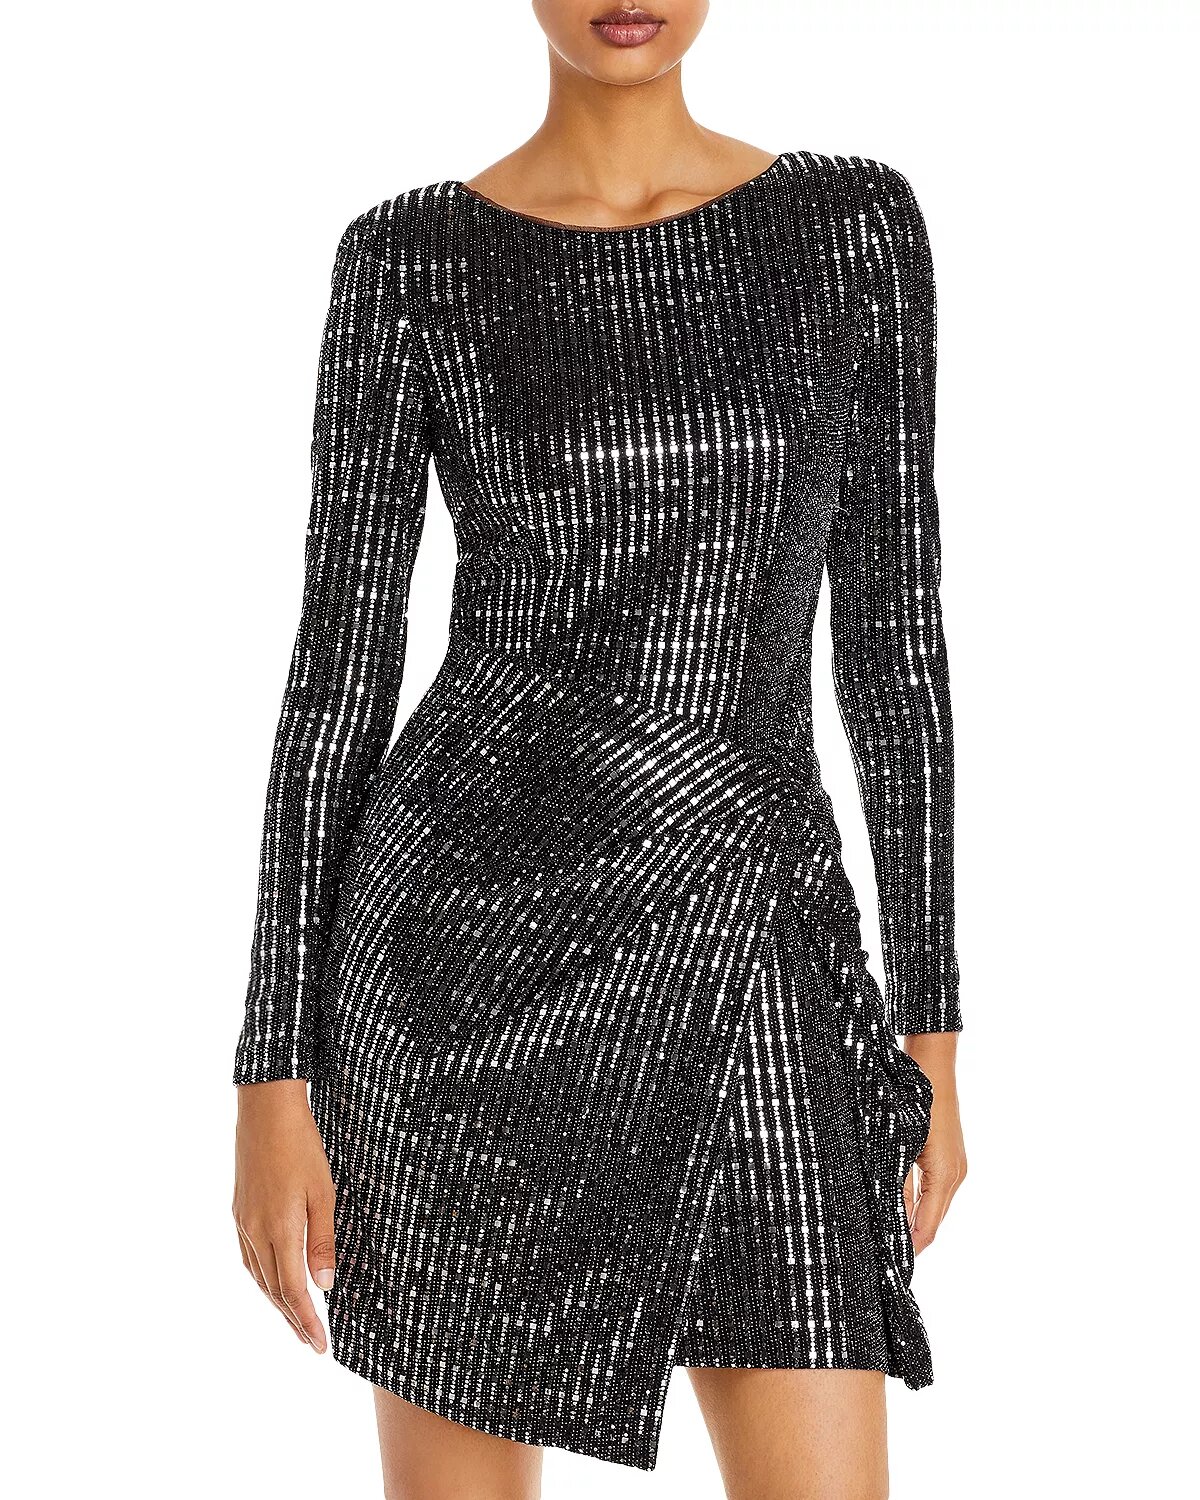 Sequined Hologram Dress - 100% Exclusive up to 25% off